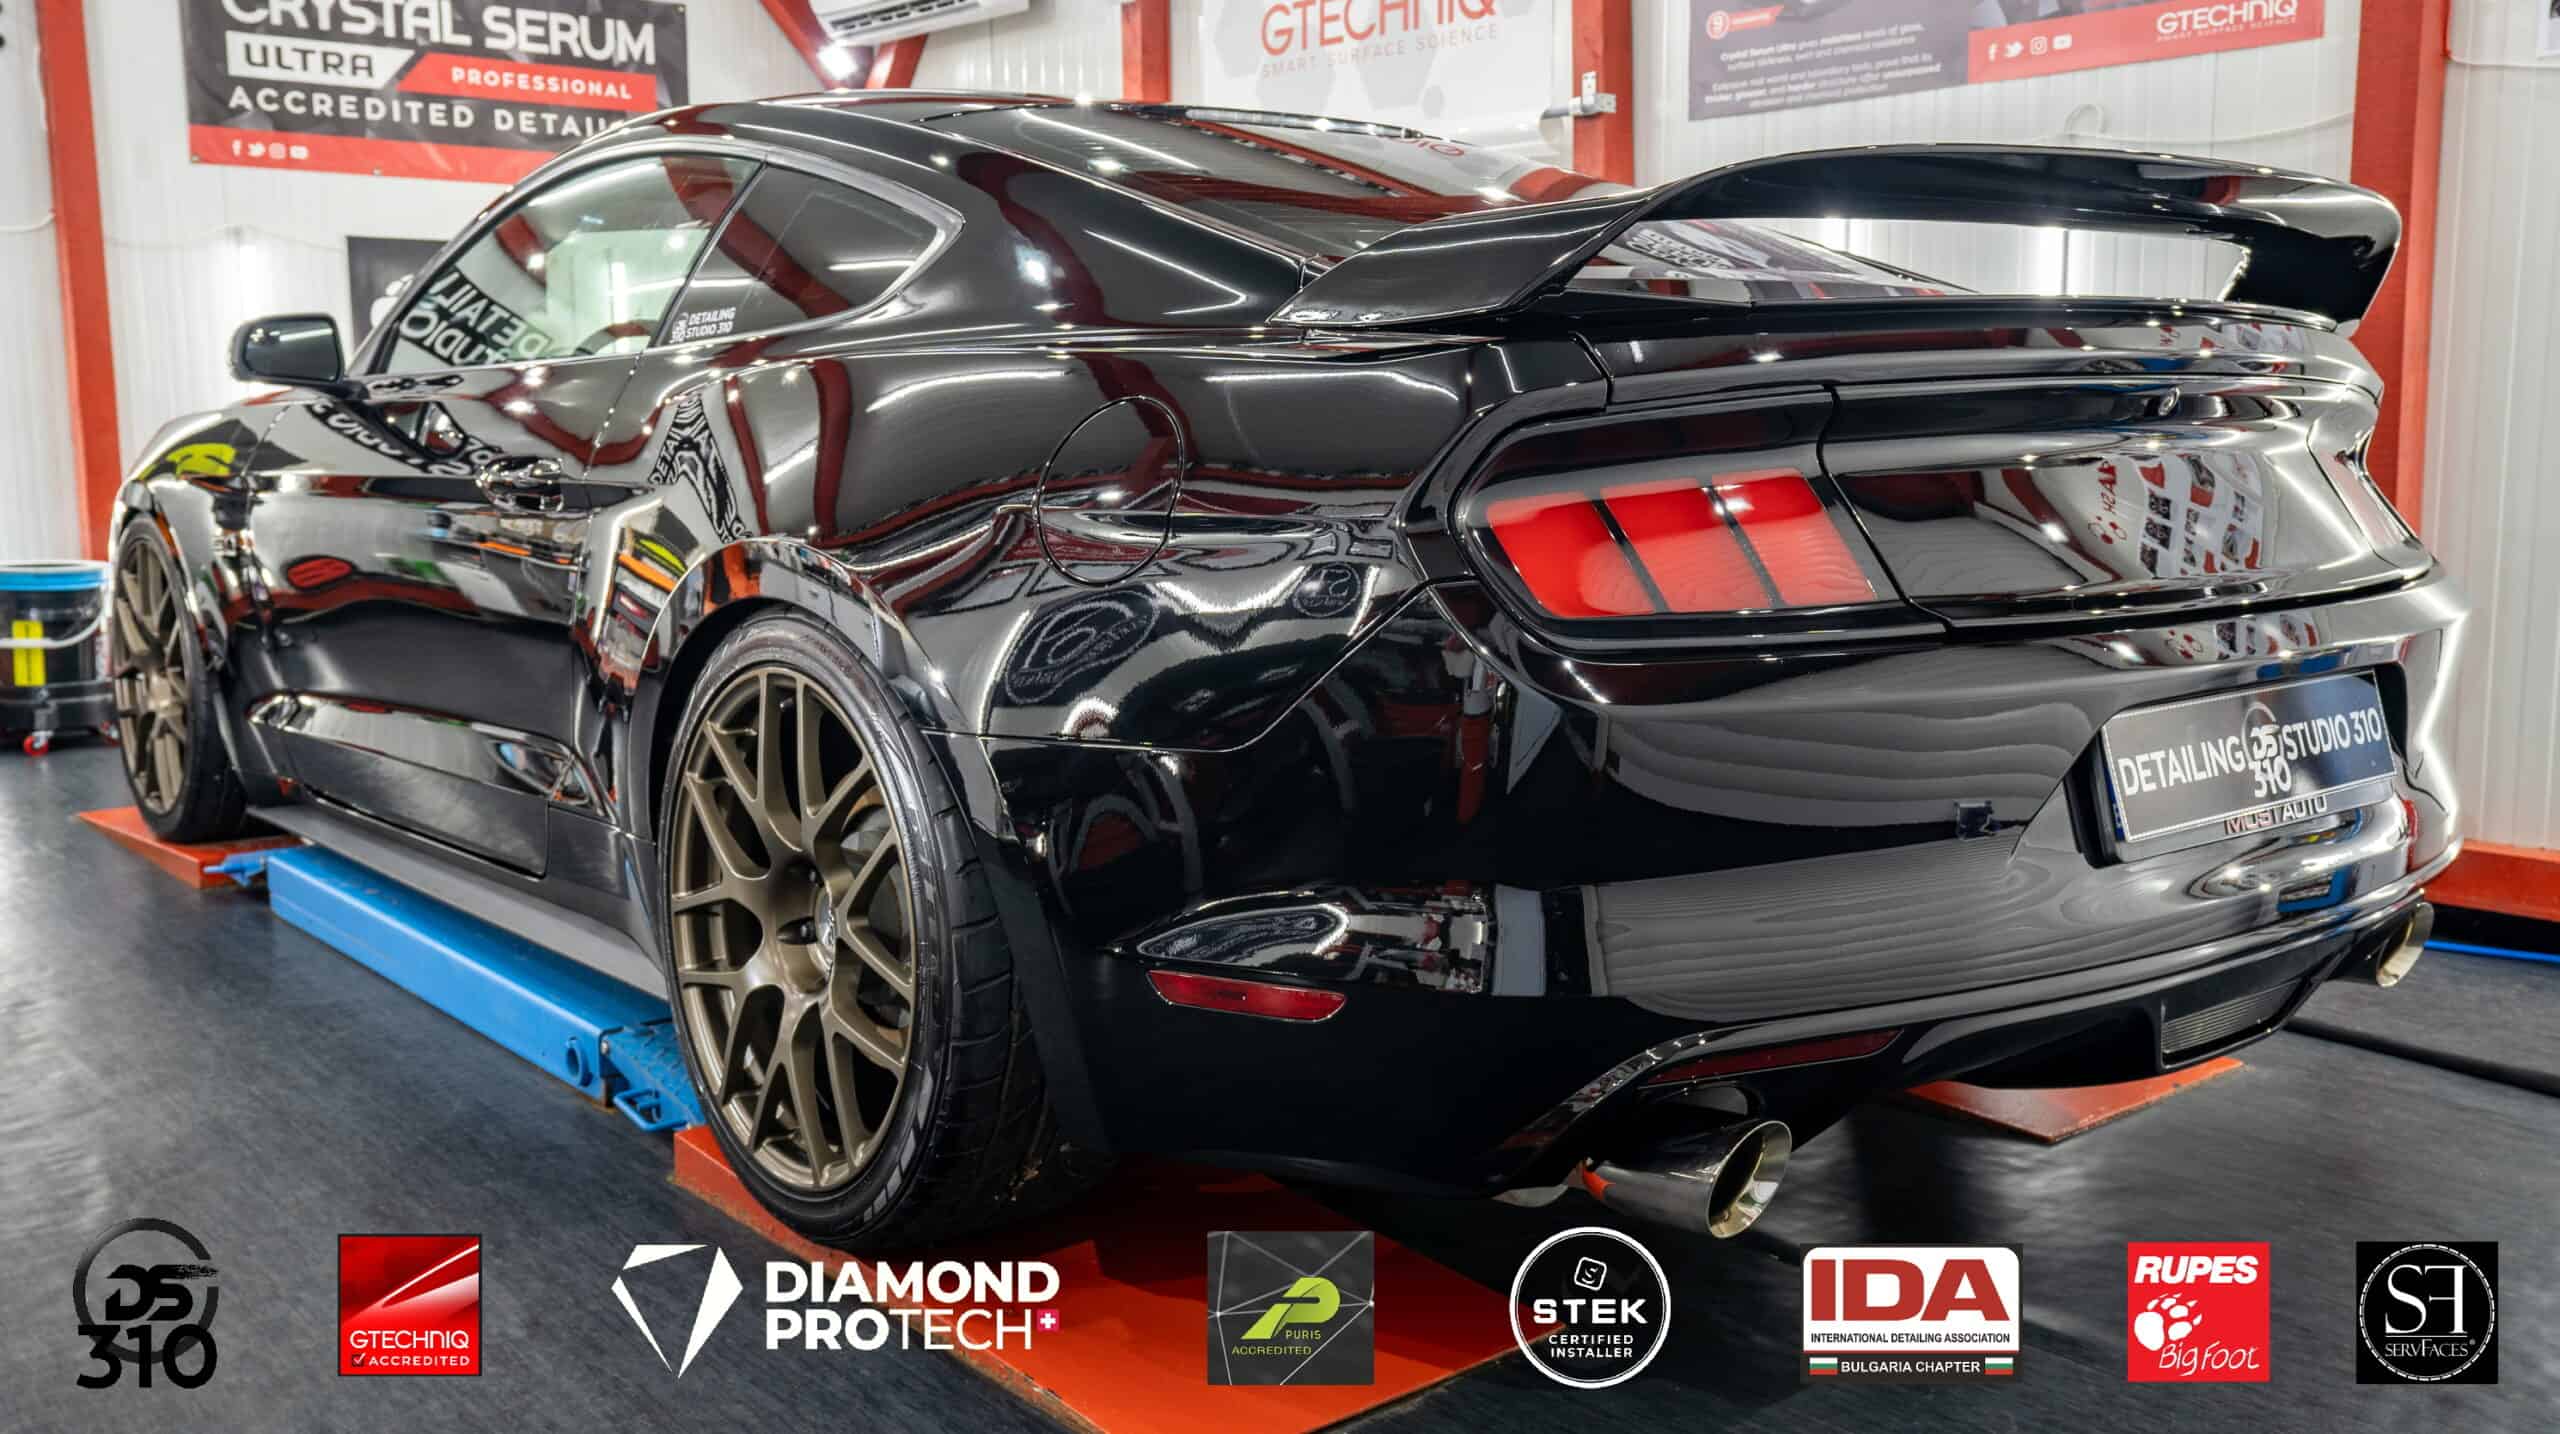 FORD Mustang GT Coyote, Diamond Protech PRO36